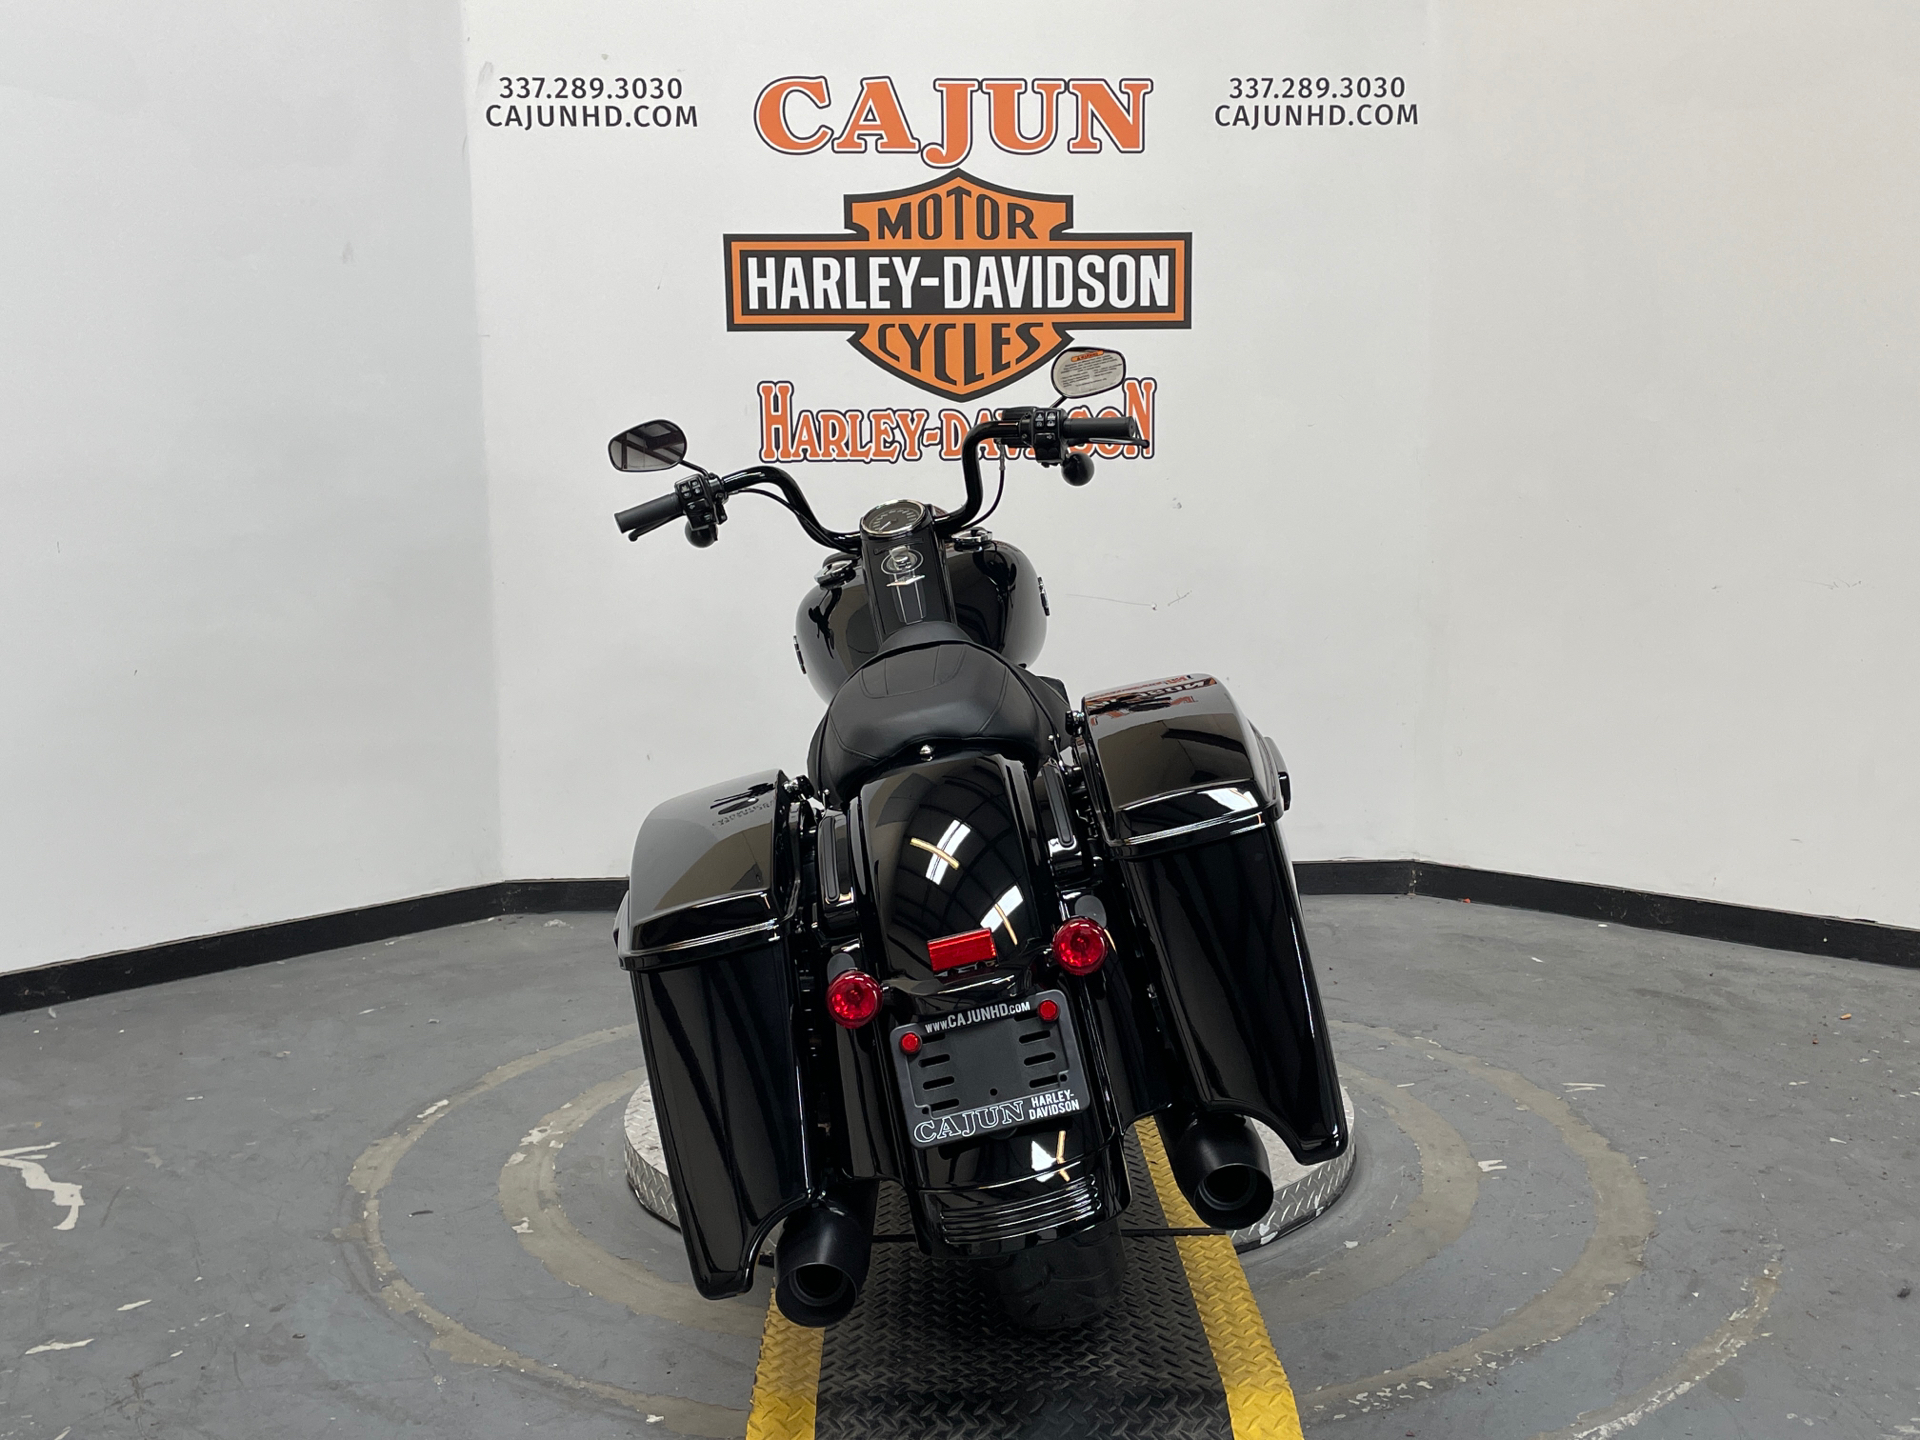 2022 Harley-Davidson Road King Special for sale - Photo 8